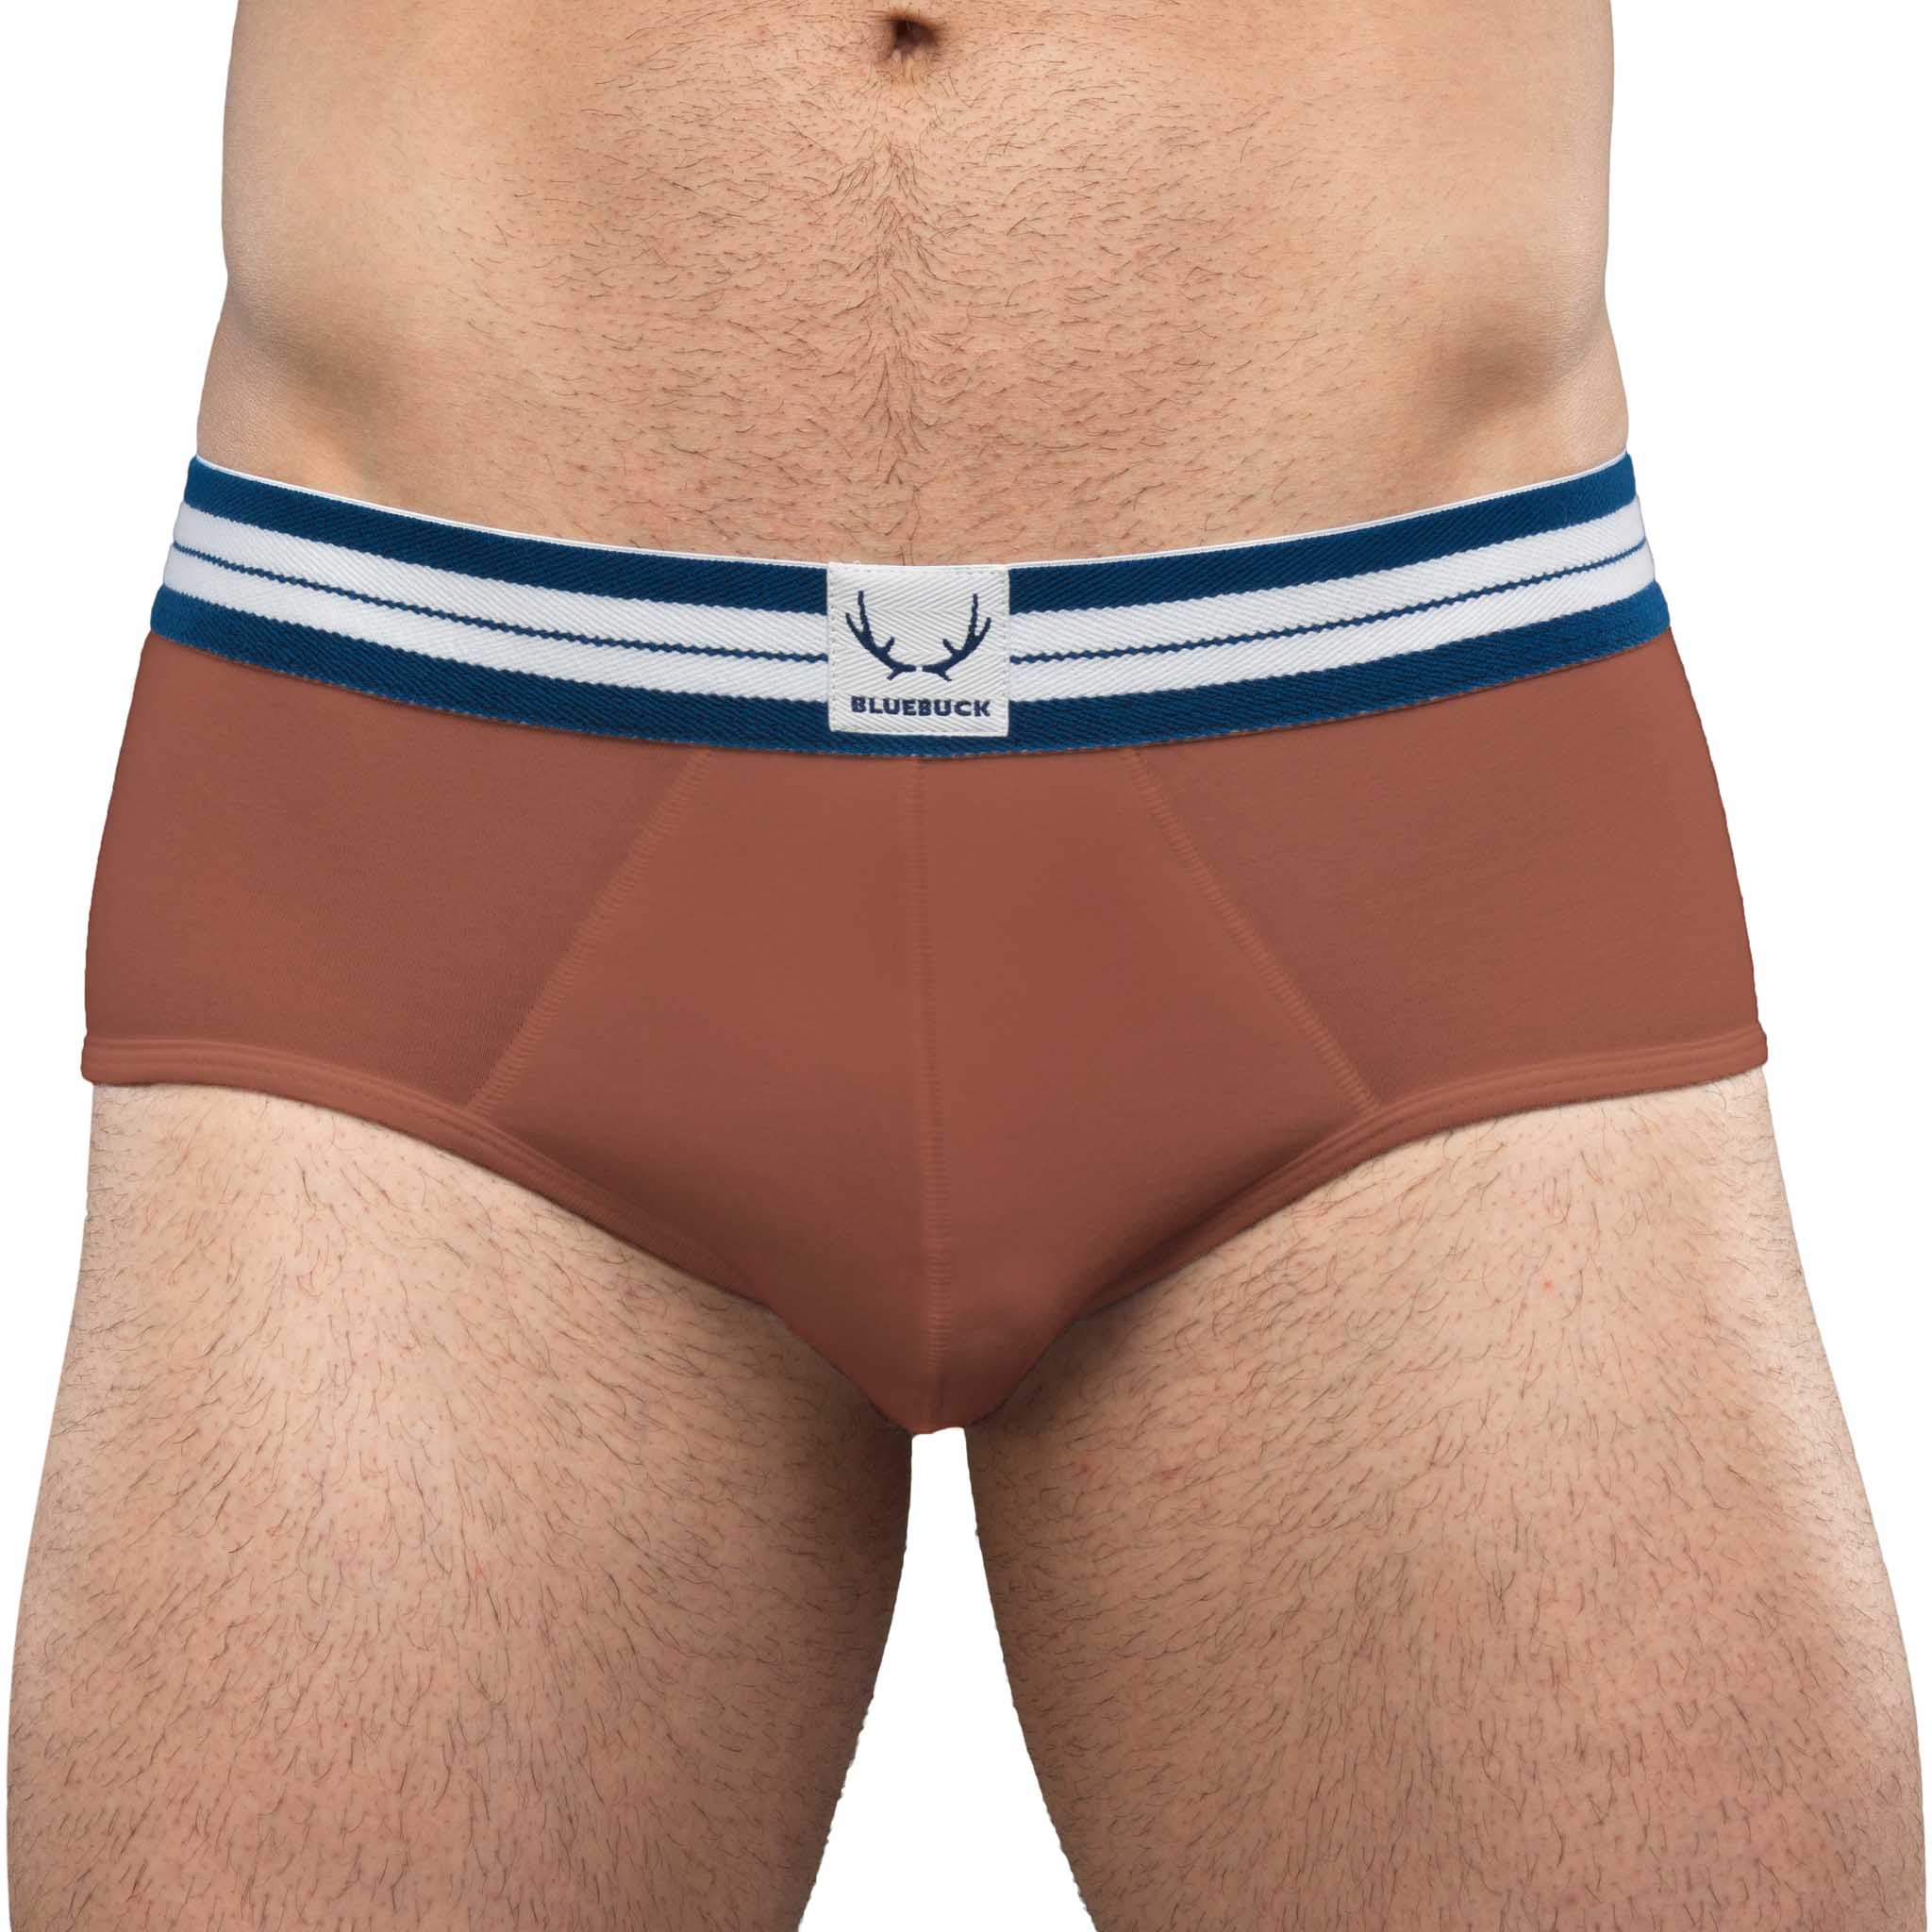 Brick red organic cotton underpants from Bluebuck